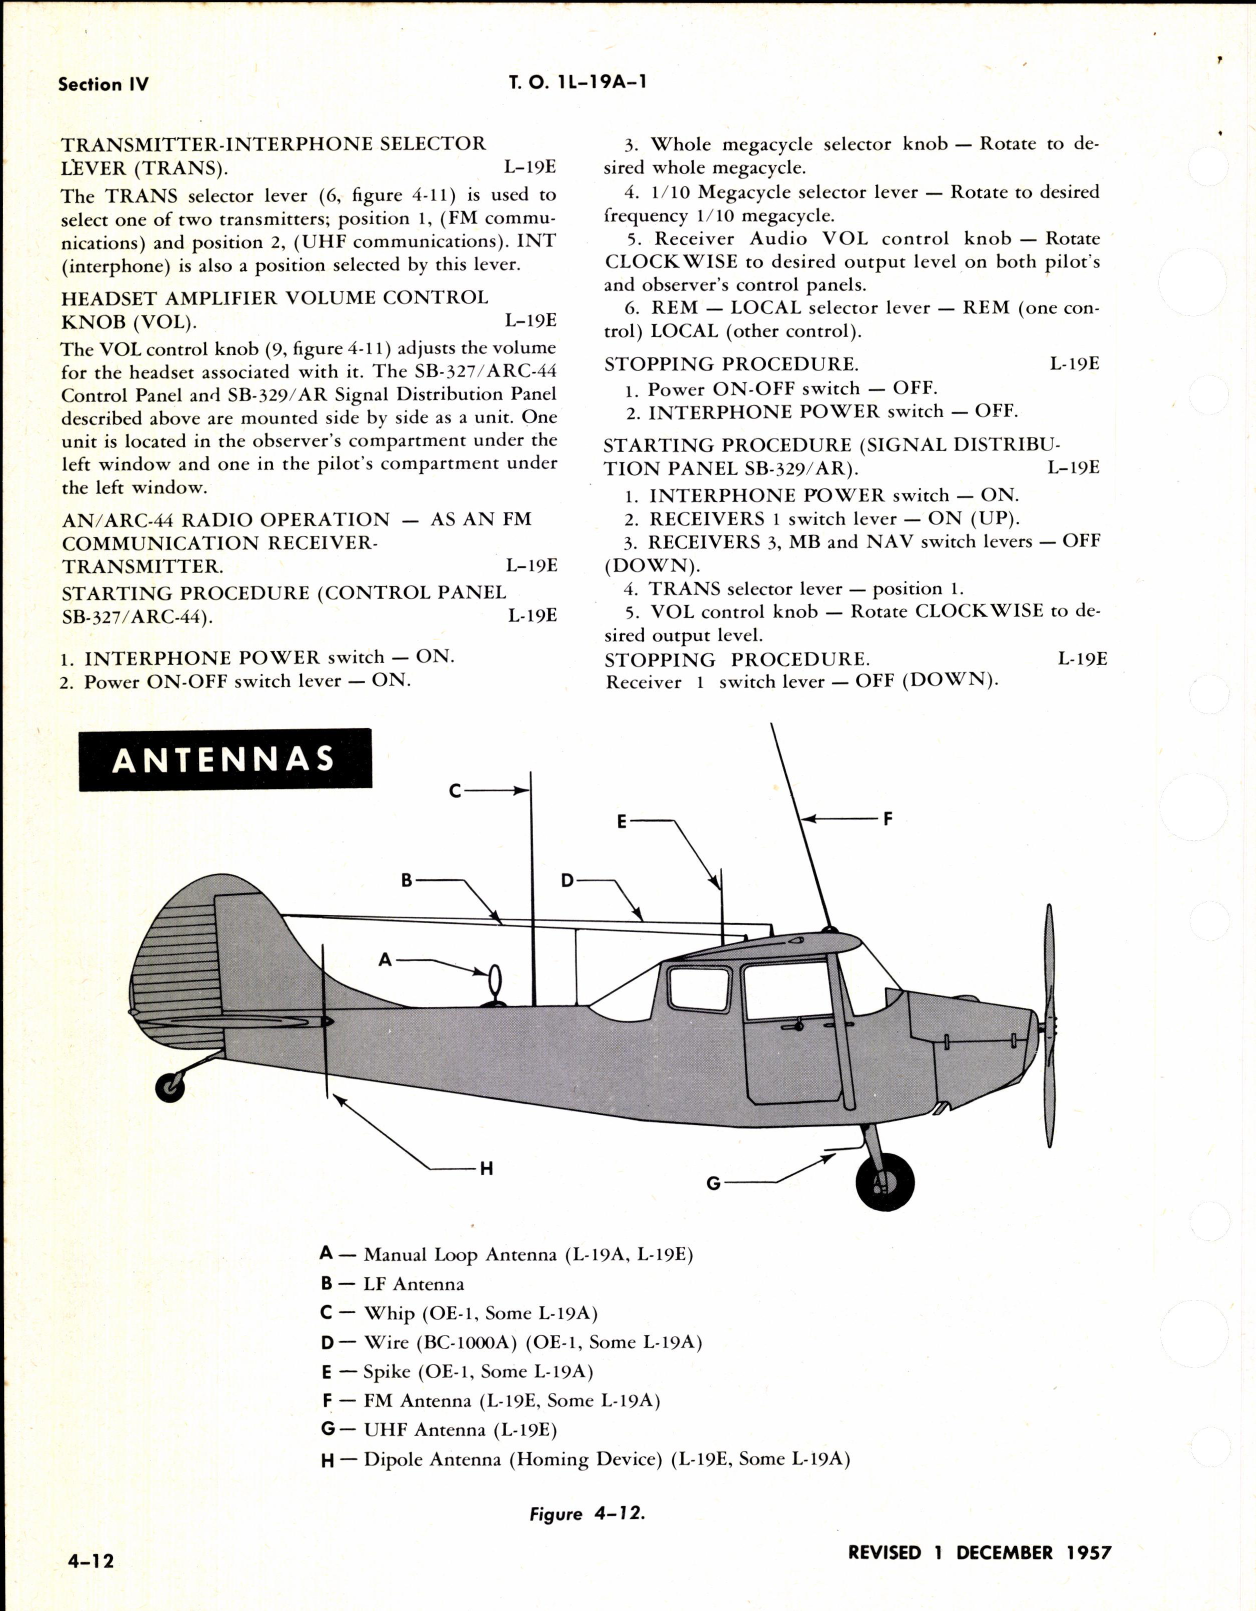 Sample page 6 from AirCorps Library document: Flight Handbook for L-19A and L-19E Aircraft